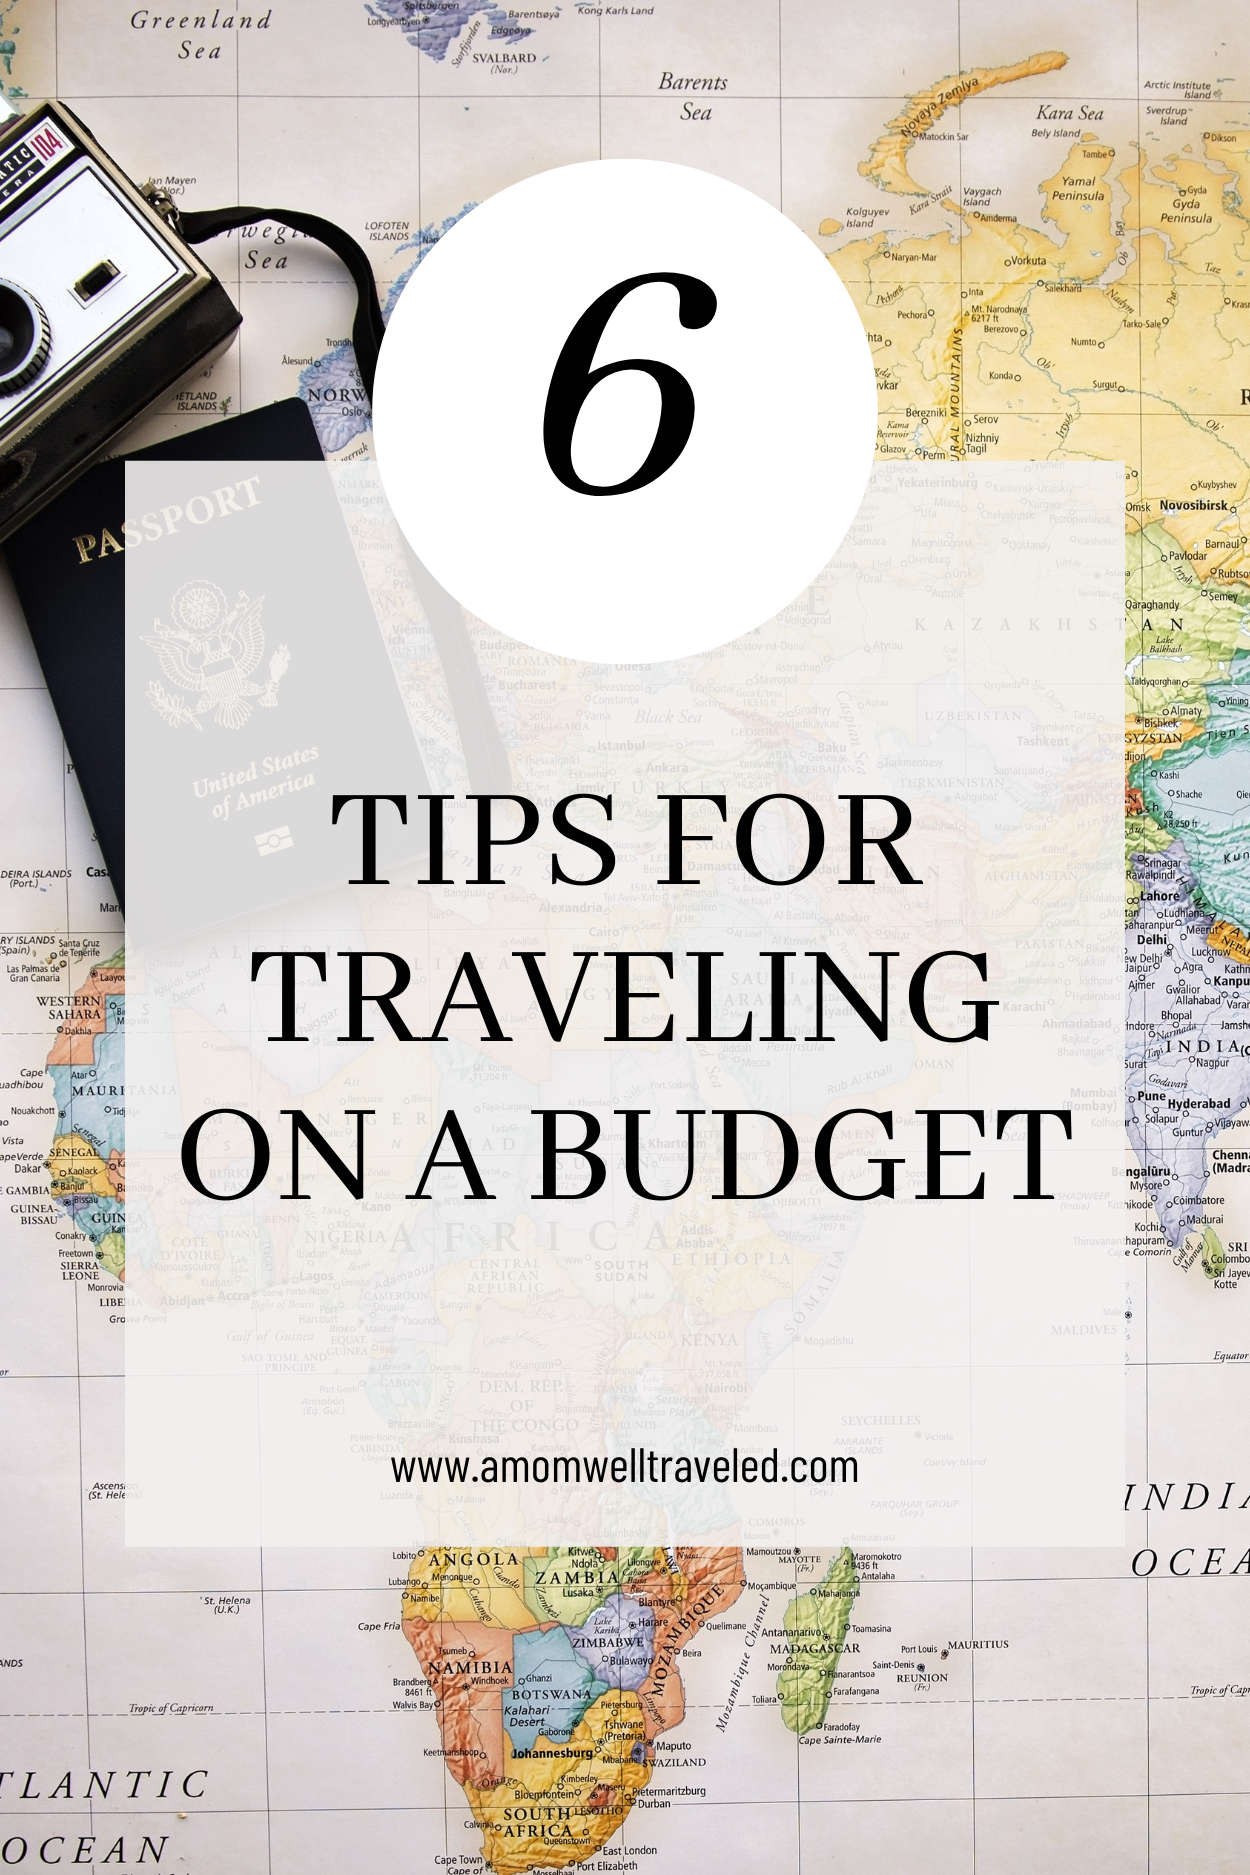 6 Tips for traveling on a budget and save money